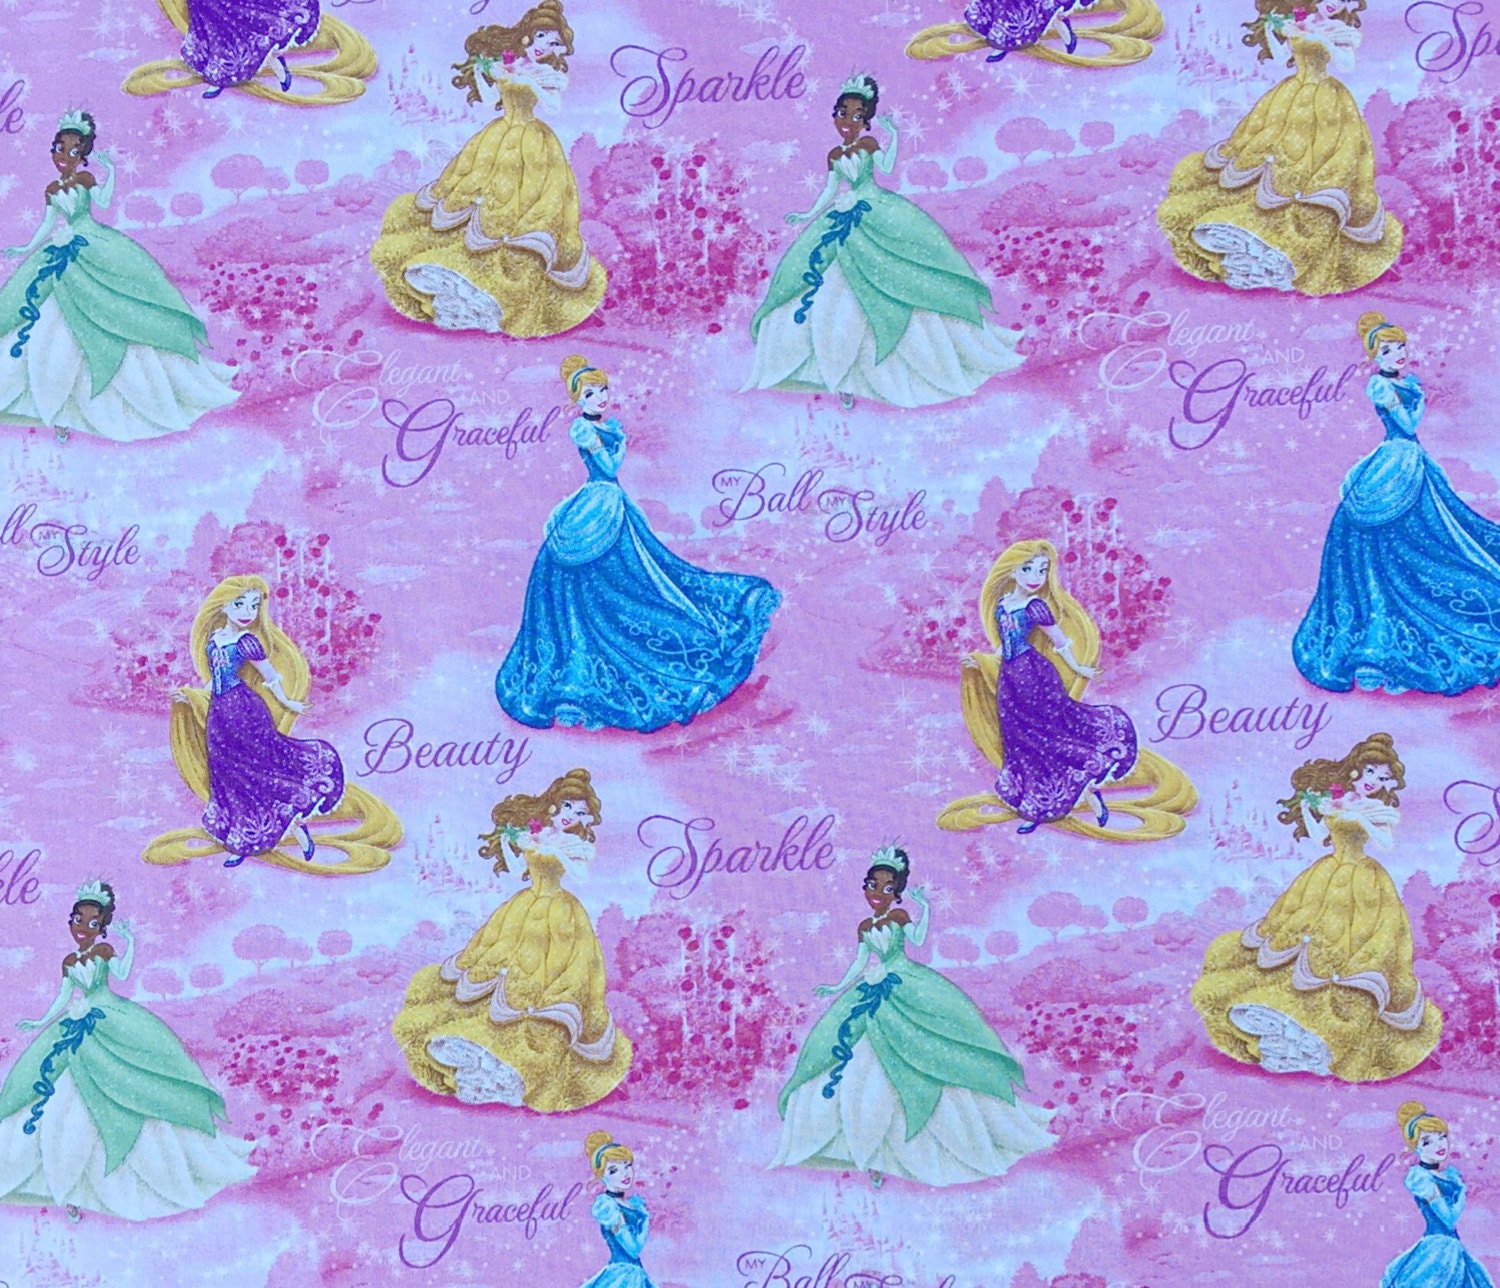 Disney Princess Fabric cotton fabric by the by